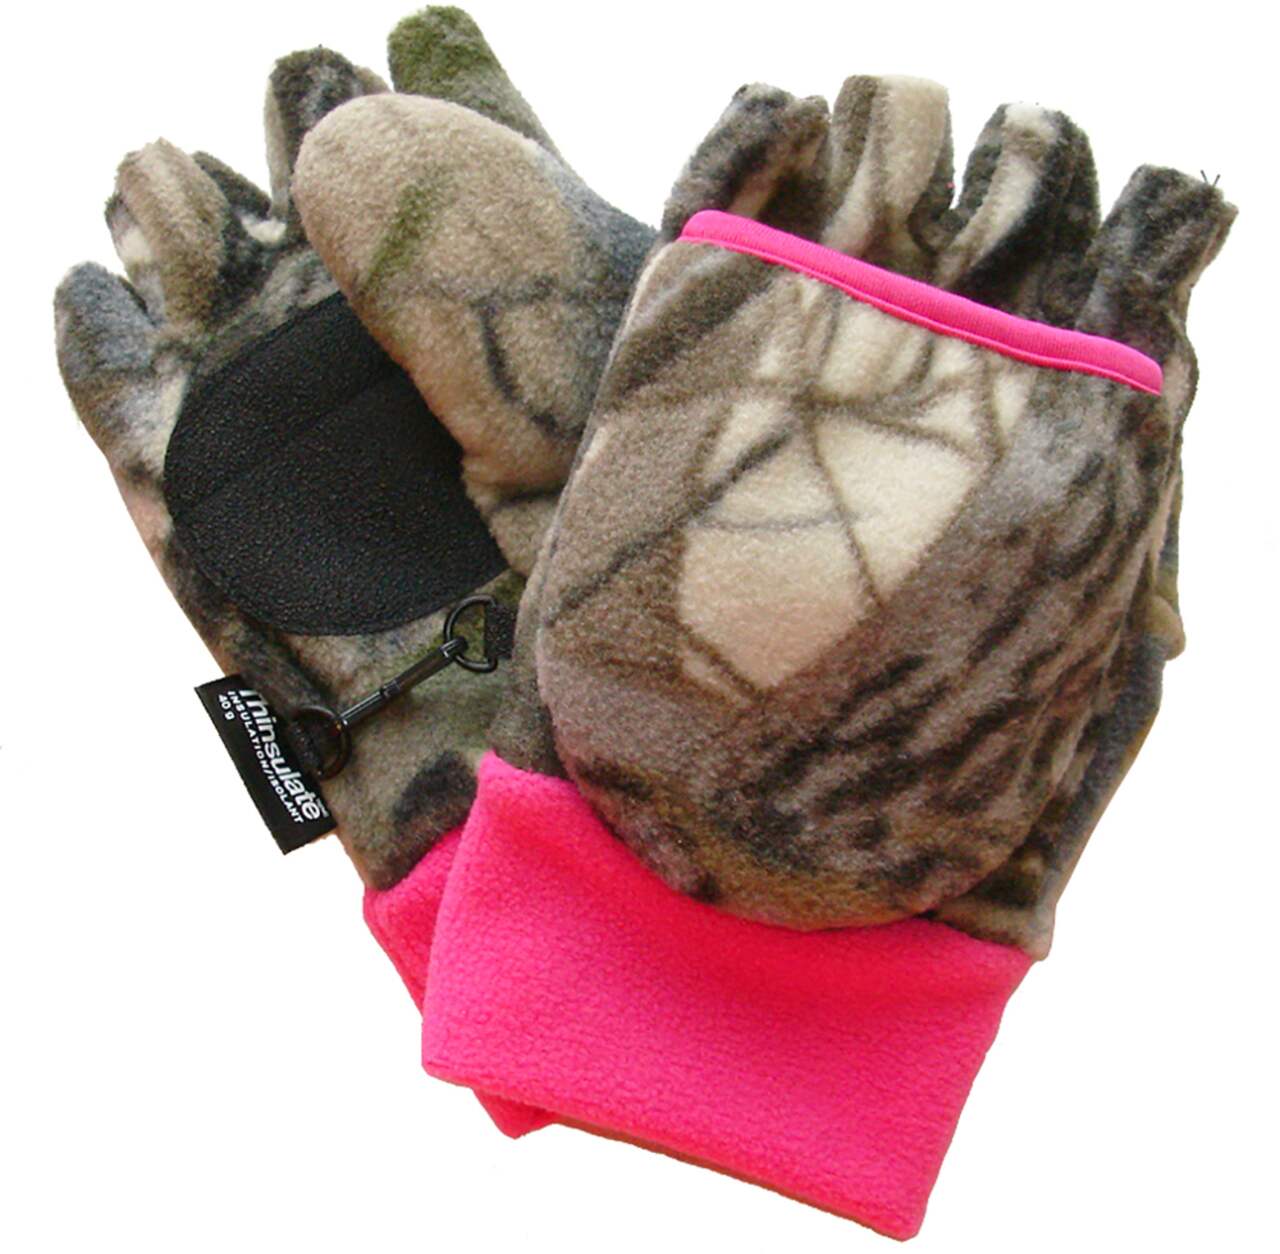 Hot Shot Women's Fleece Hunting Mittens/Gloves with Non-Slip Grip, Warm  Thinsulate Lining, Camo